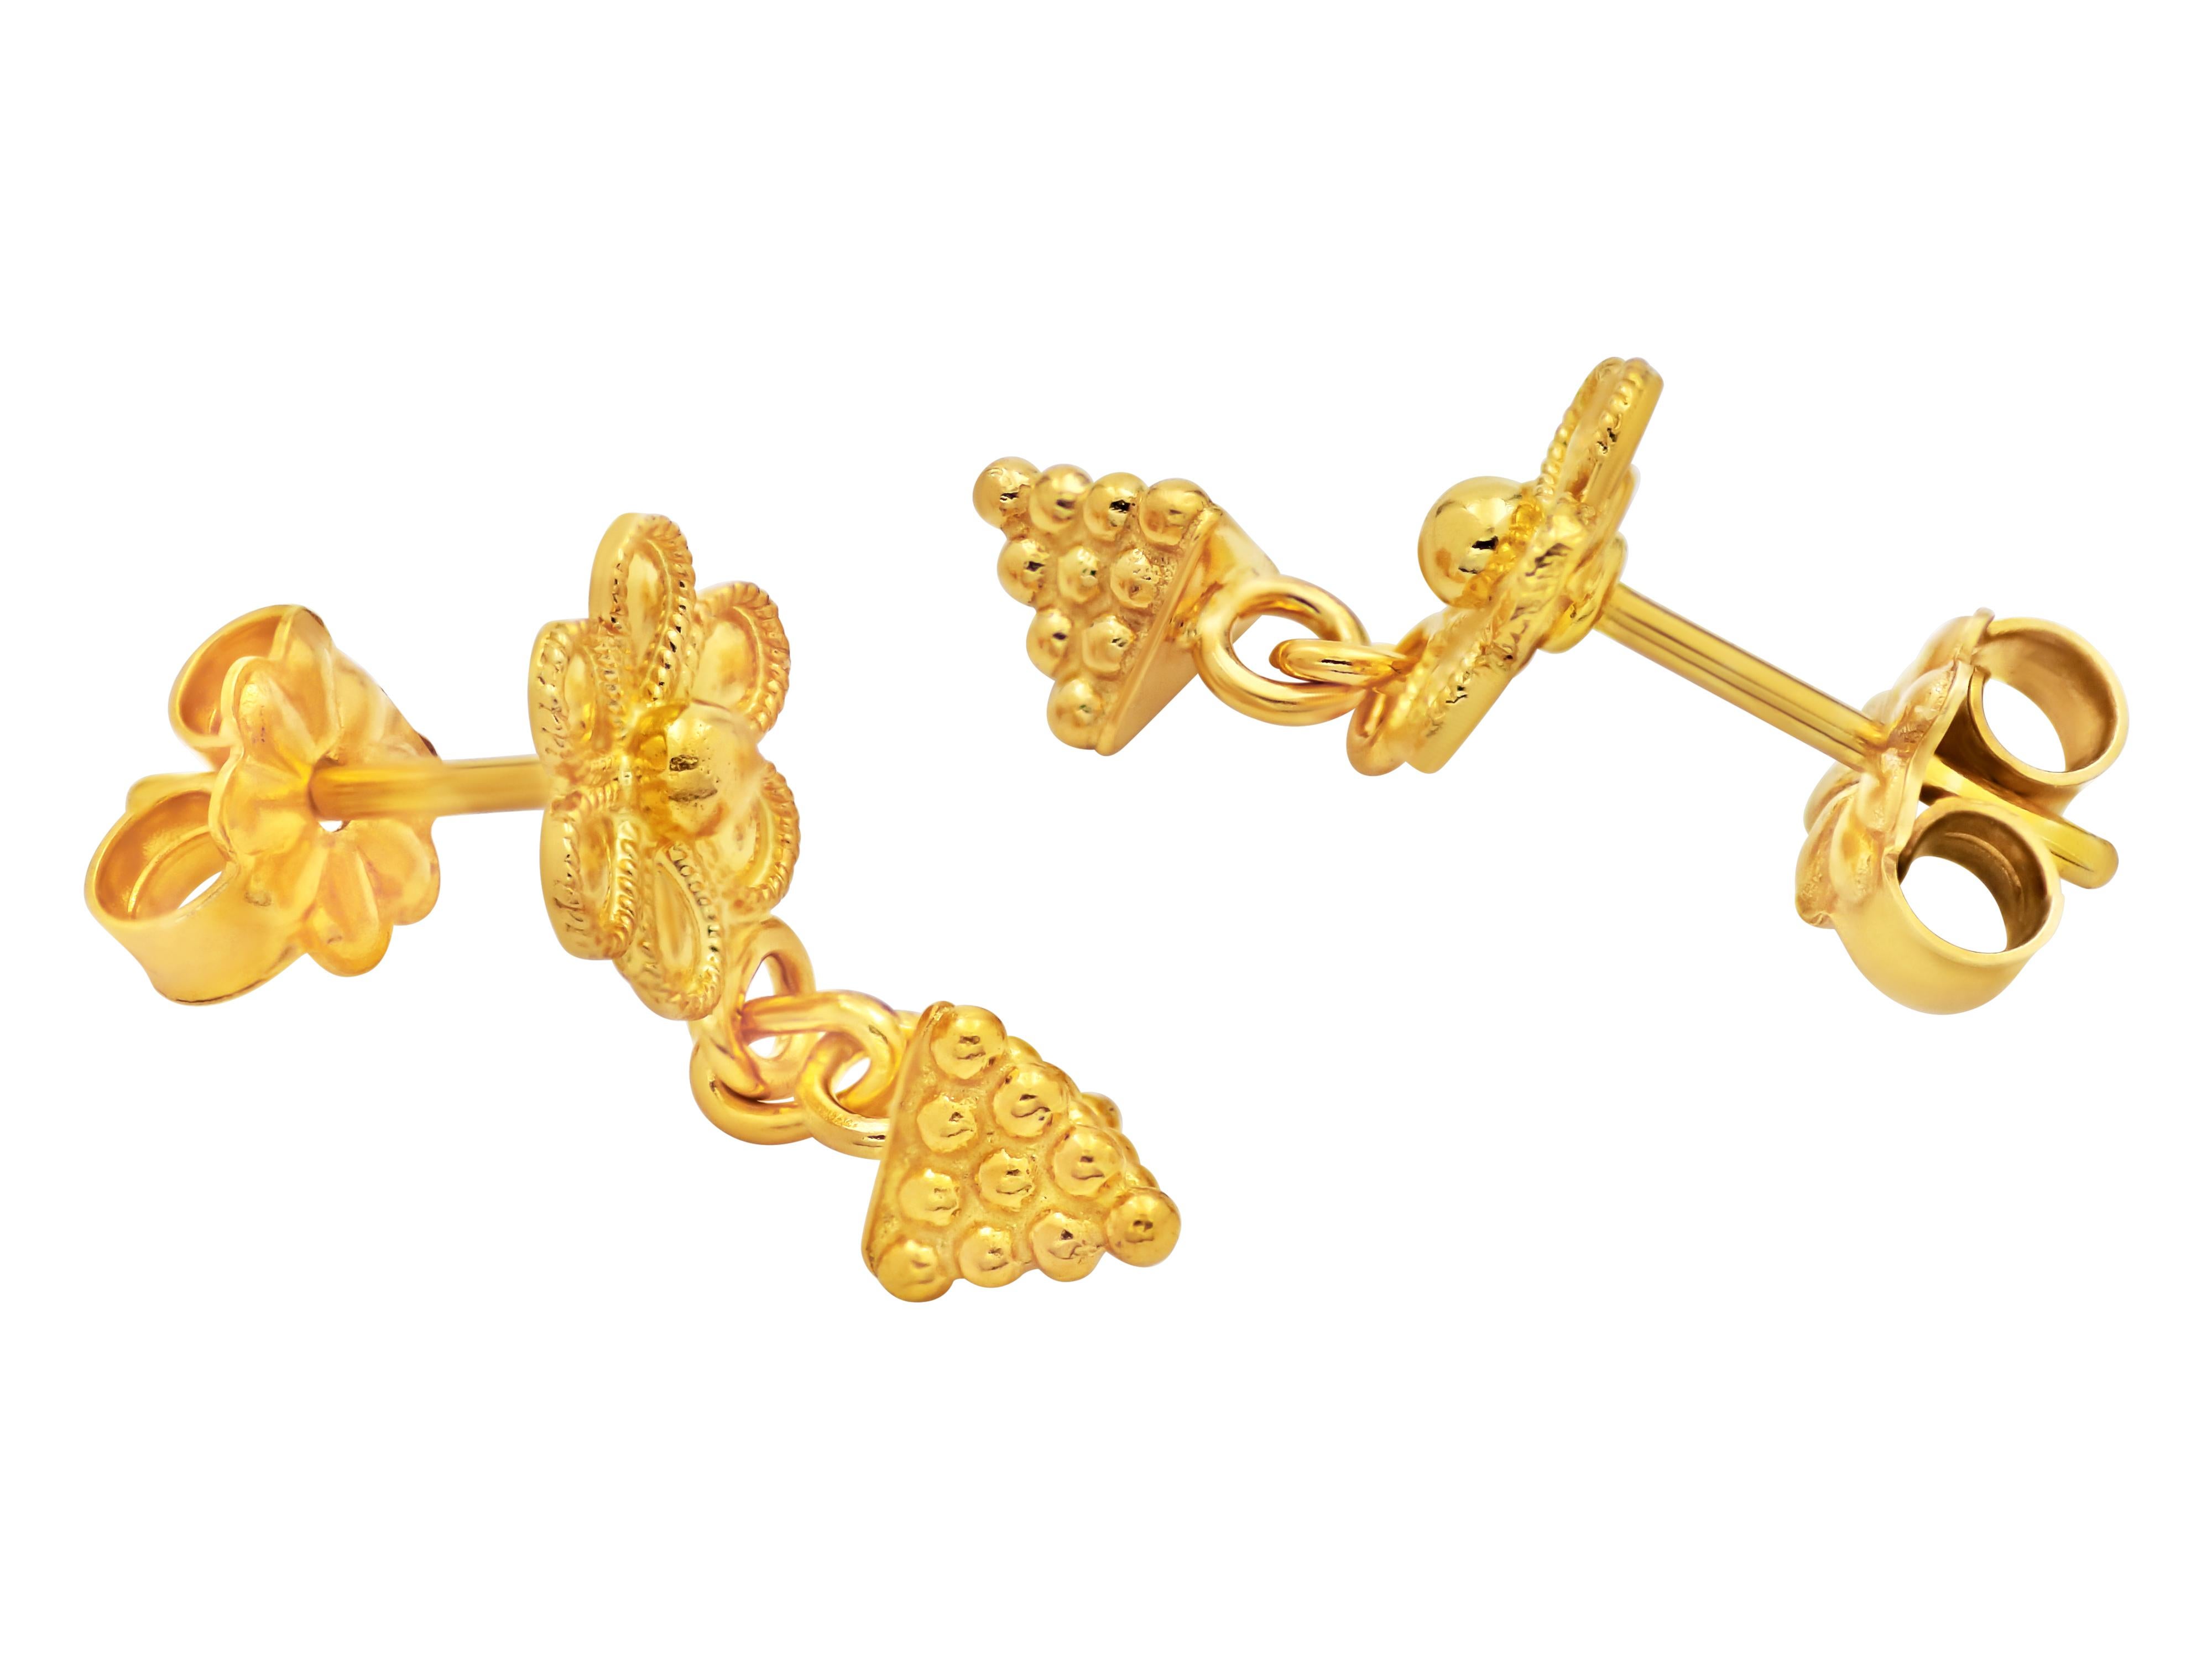 Dangle daisy earrings with granulation pyramids in 18k yellow gold. A neoclassical museum style work that shows class taste and knowledge.